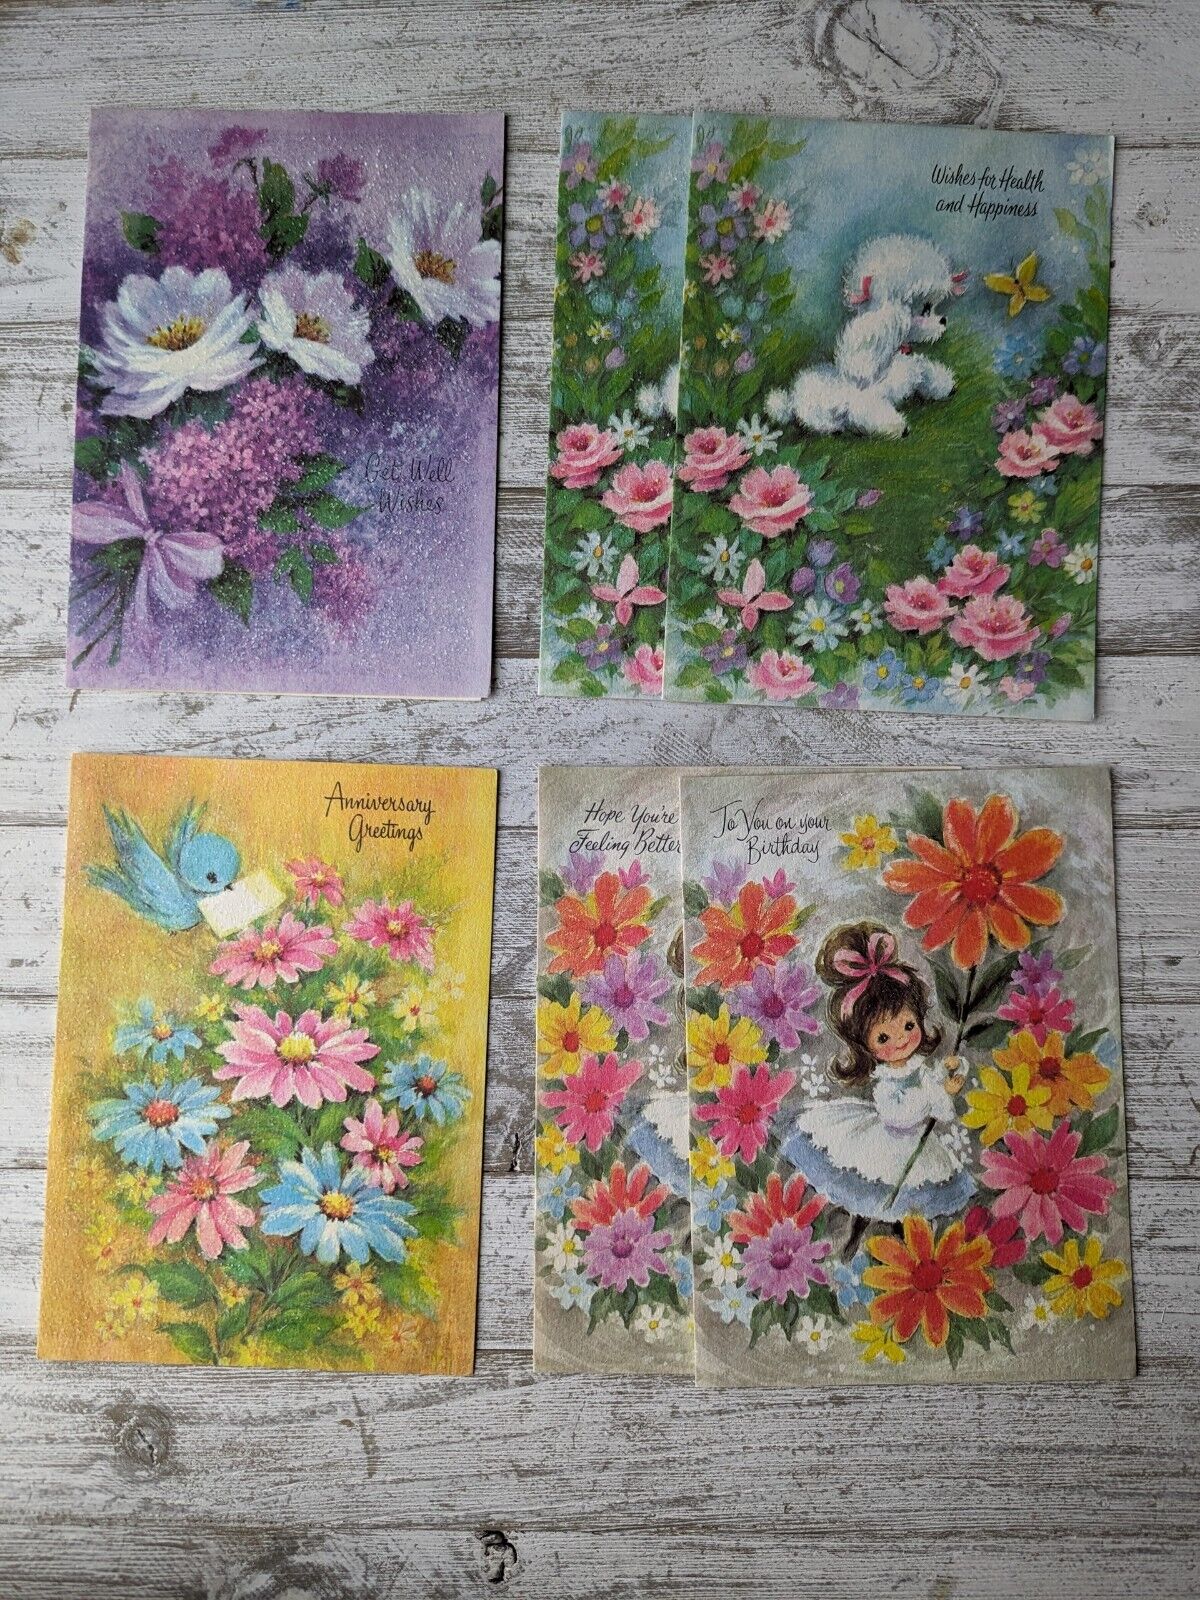 Box Of Unused DeLuxe Famous Glitter Greeting Cards. Sunshine Poodles Kittens 12